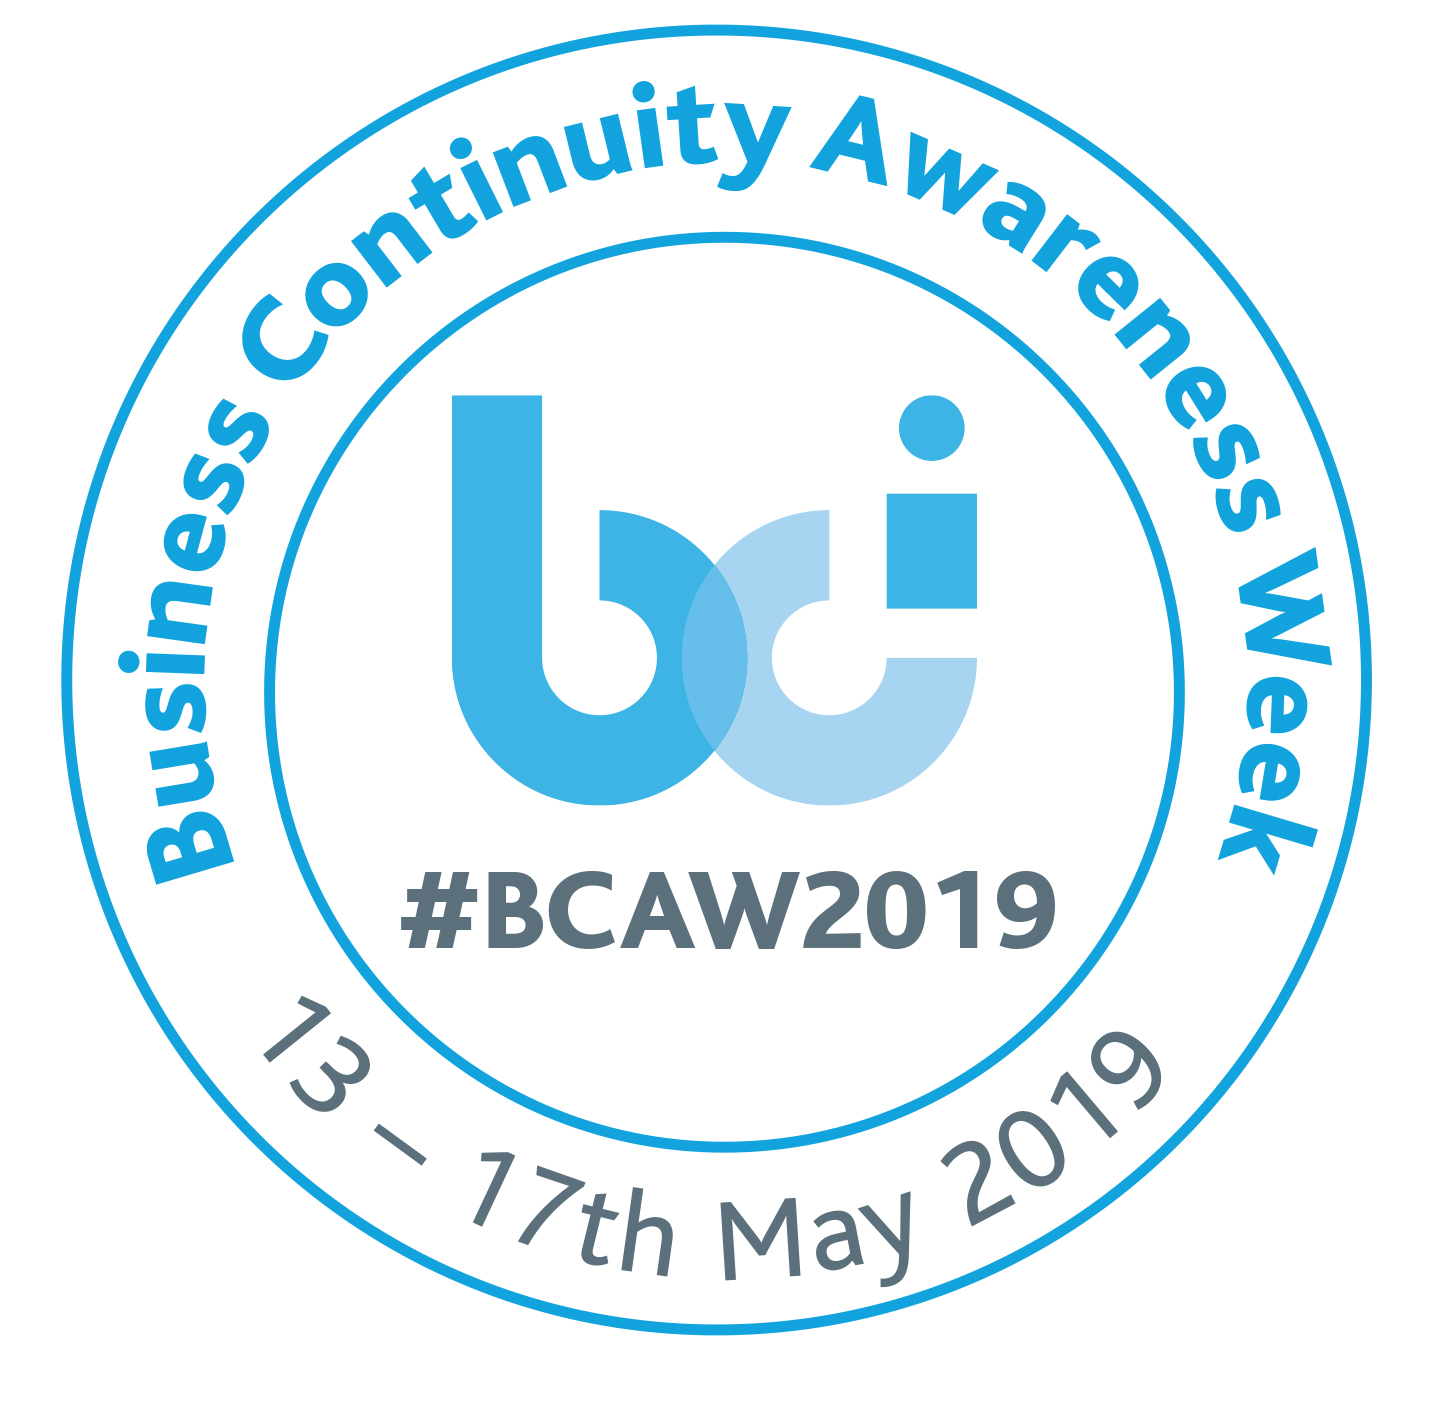 business-continuity-awareness-week.bcaw-rothstein-publishing